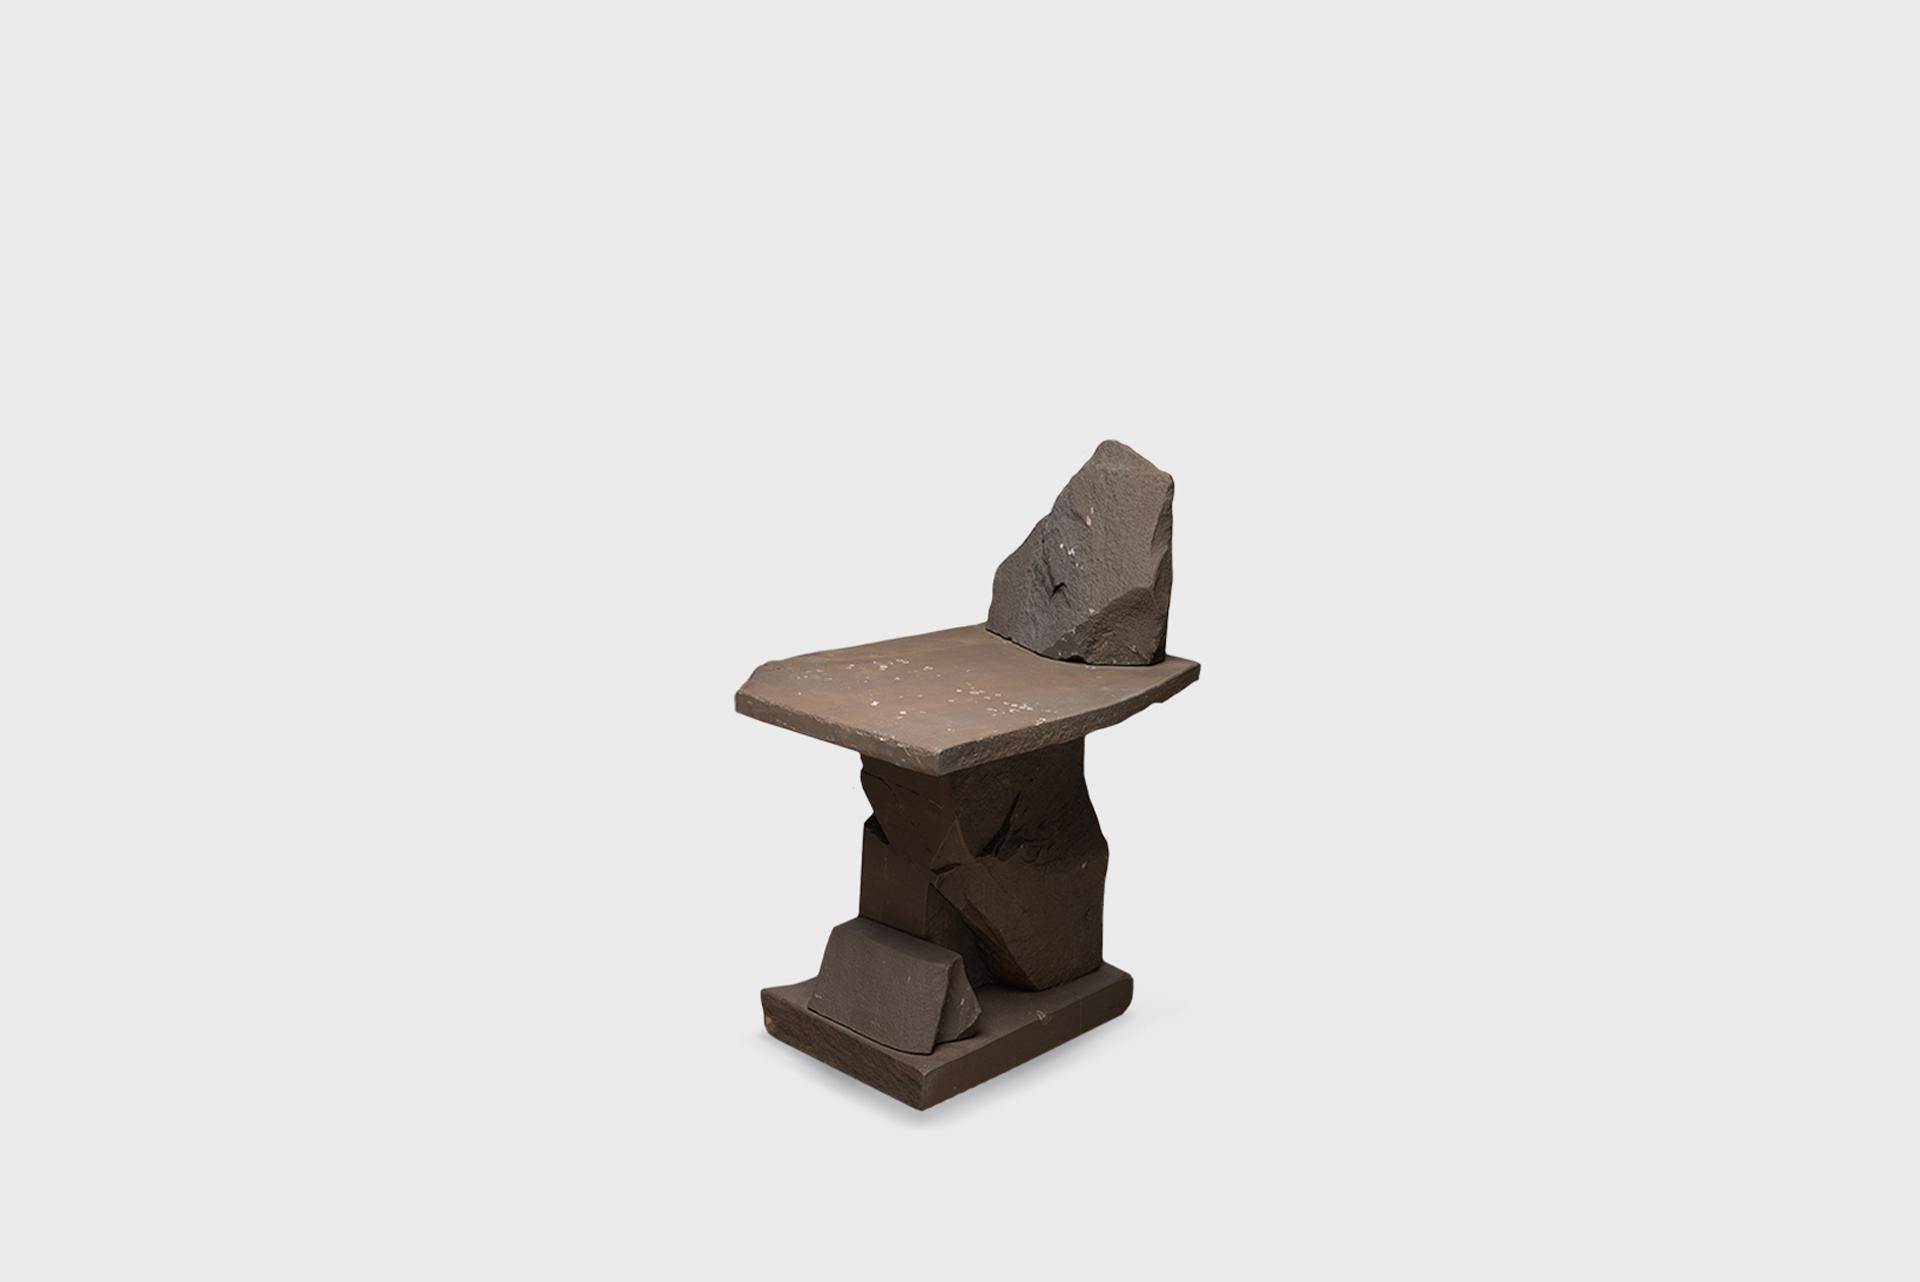 Contemporary Natural Chair 22, Graywacke Offcut Gray Stone, Carsten in Der Elst For Sale 2